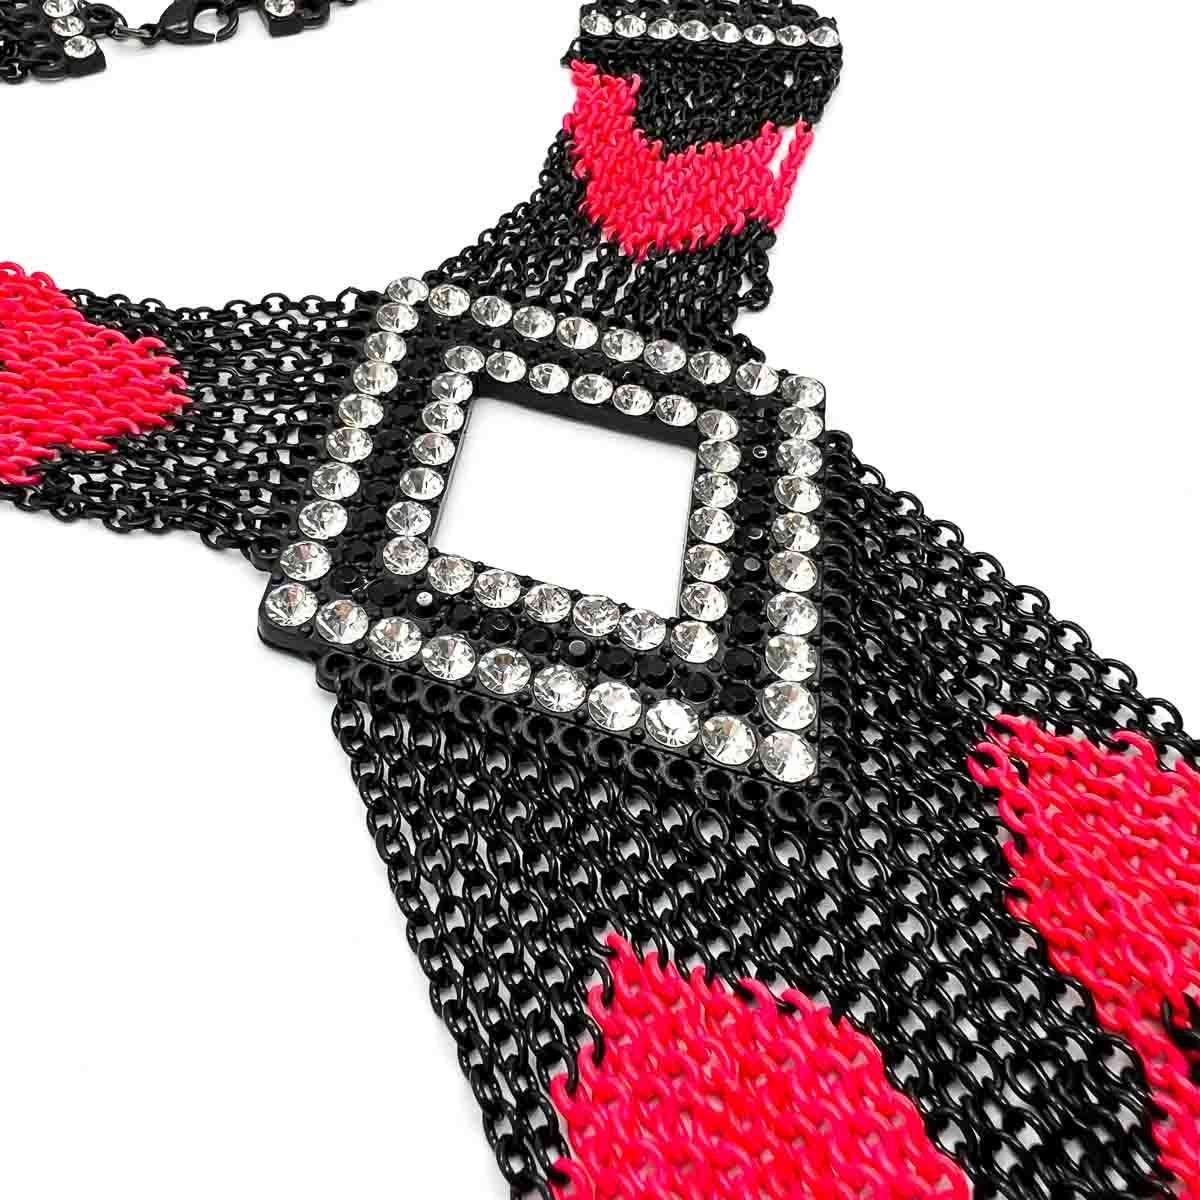 A Statement Neon & Black Tasselled Panel Necklace. Blackened metalwork contrasts to perfection with the neon pink and rhinestone panels. The finishing tassel giving an air of movement and freedom. An absolute stunner that will be certain to turn